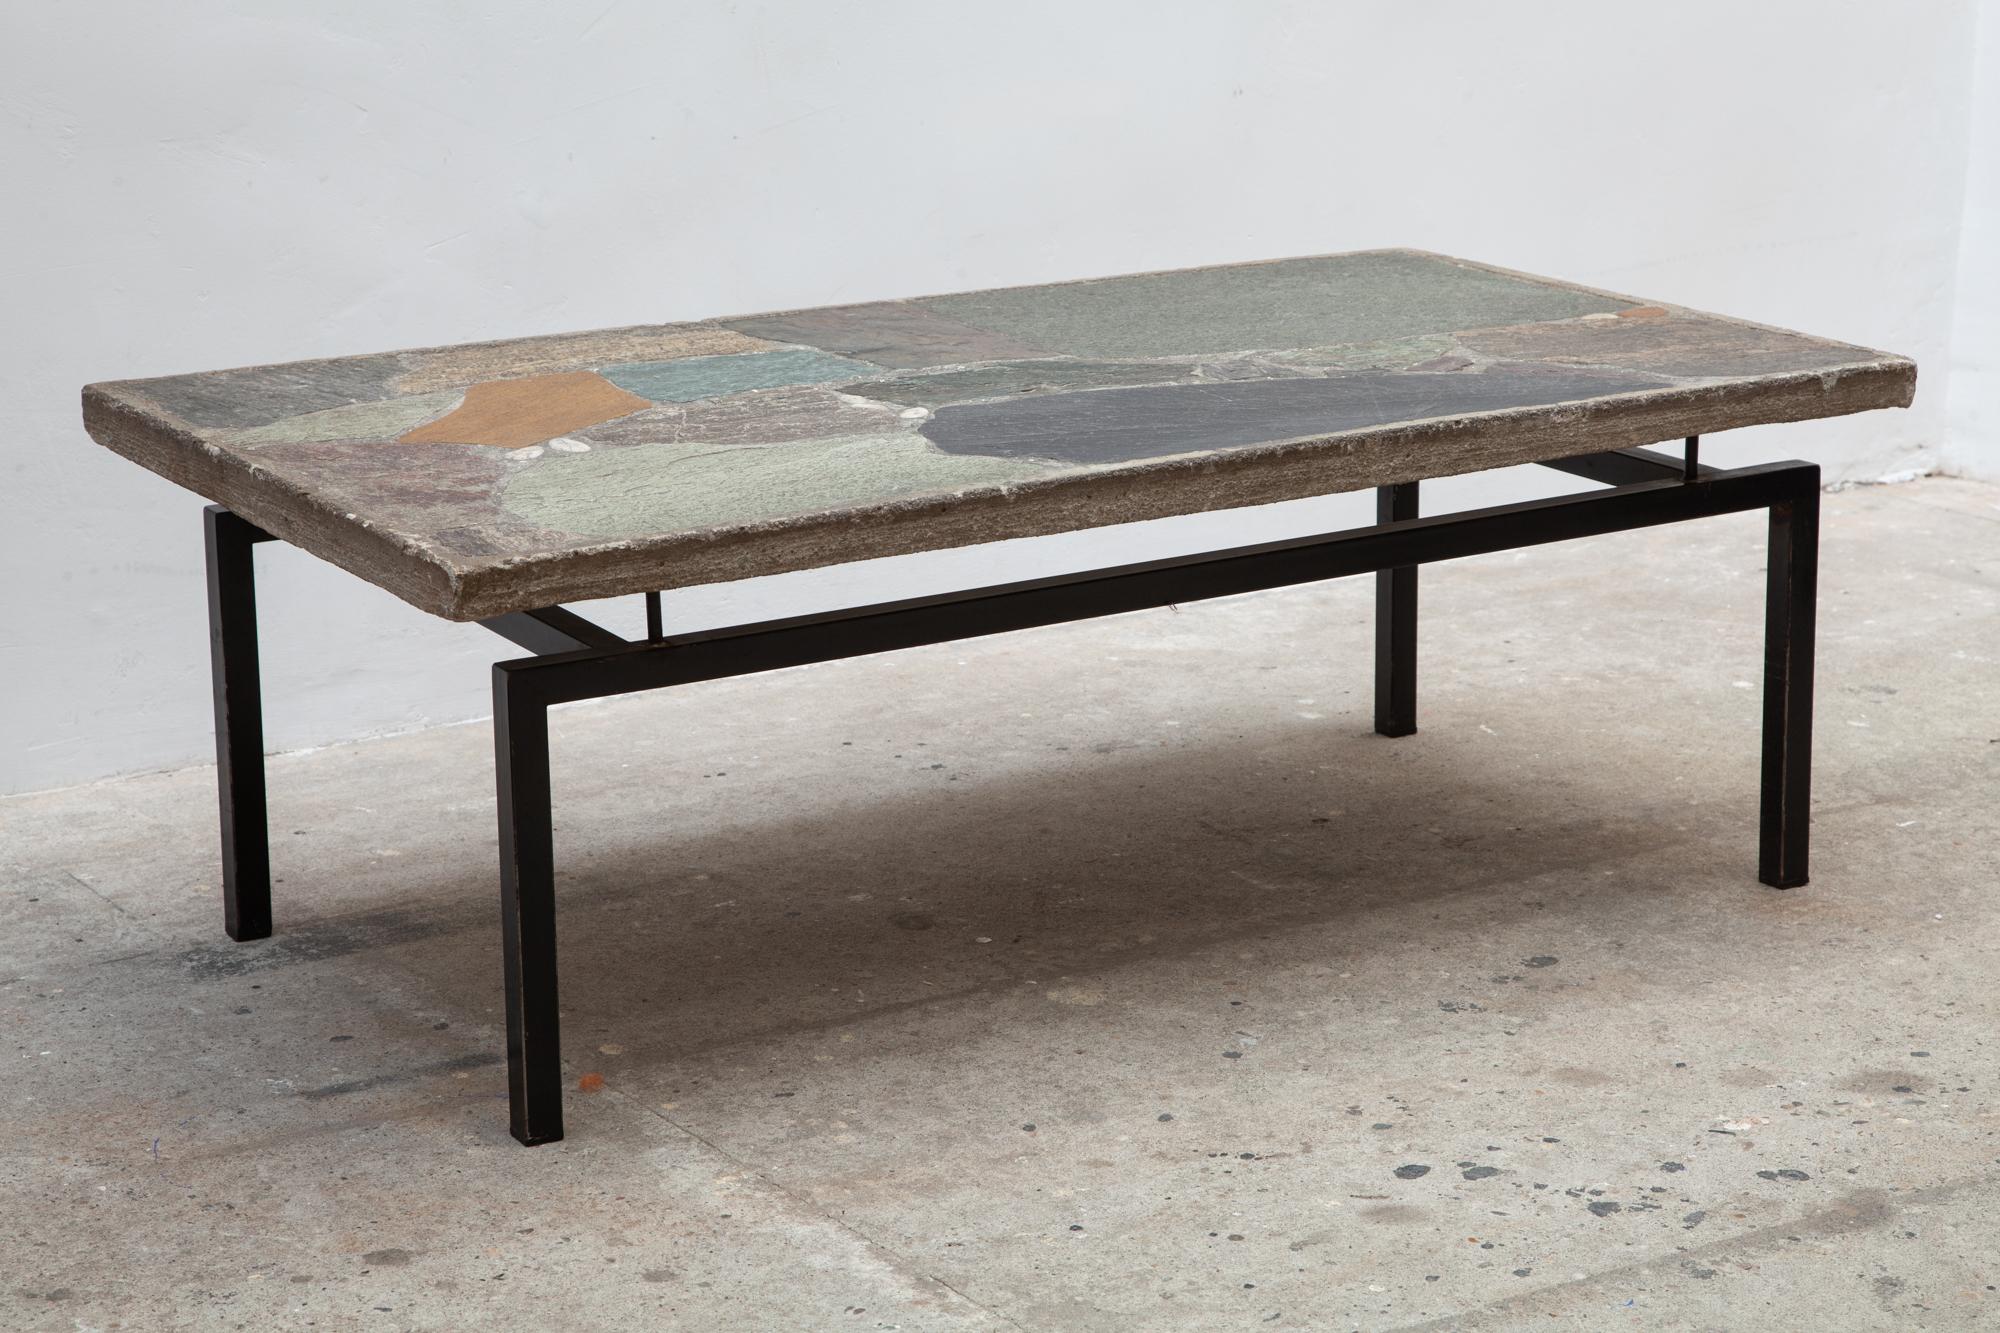 Vintage midcentury coffee table on a black metal base. A beautiful mosaic of slate and other stones in shades of grey, green and brown designed by the Dutch sculptor Paul Kingma,1960s.

Paul Kingman, born in 1931, was a sculptor and mosaic artist.